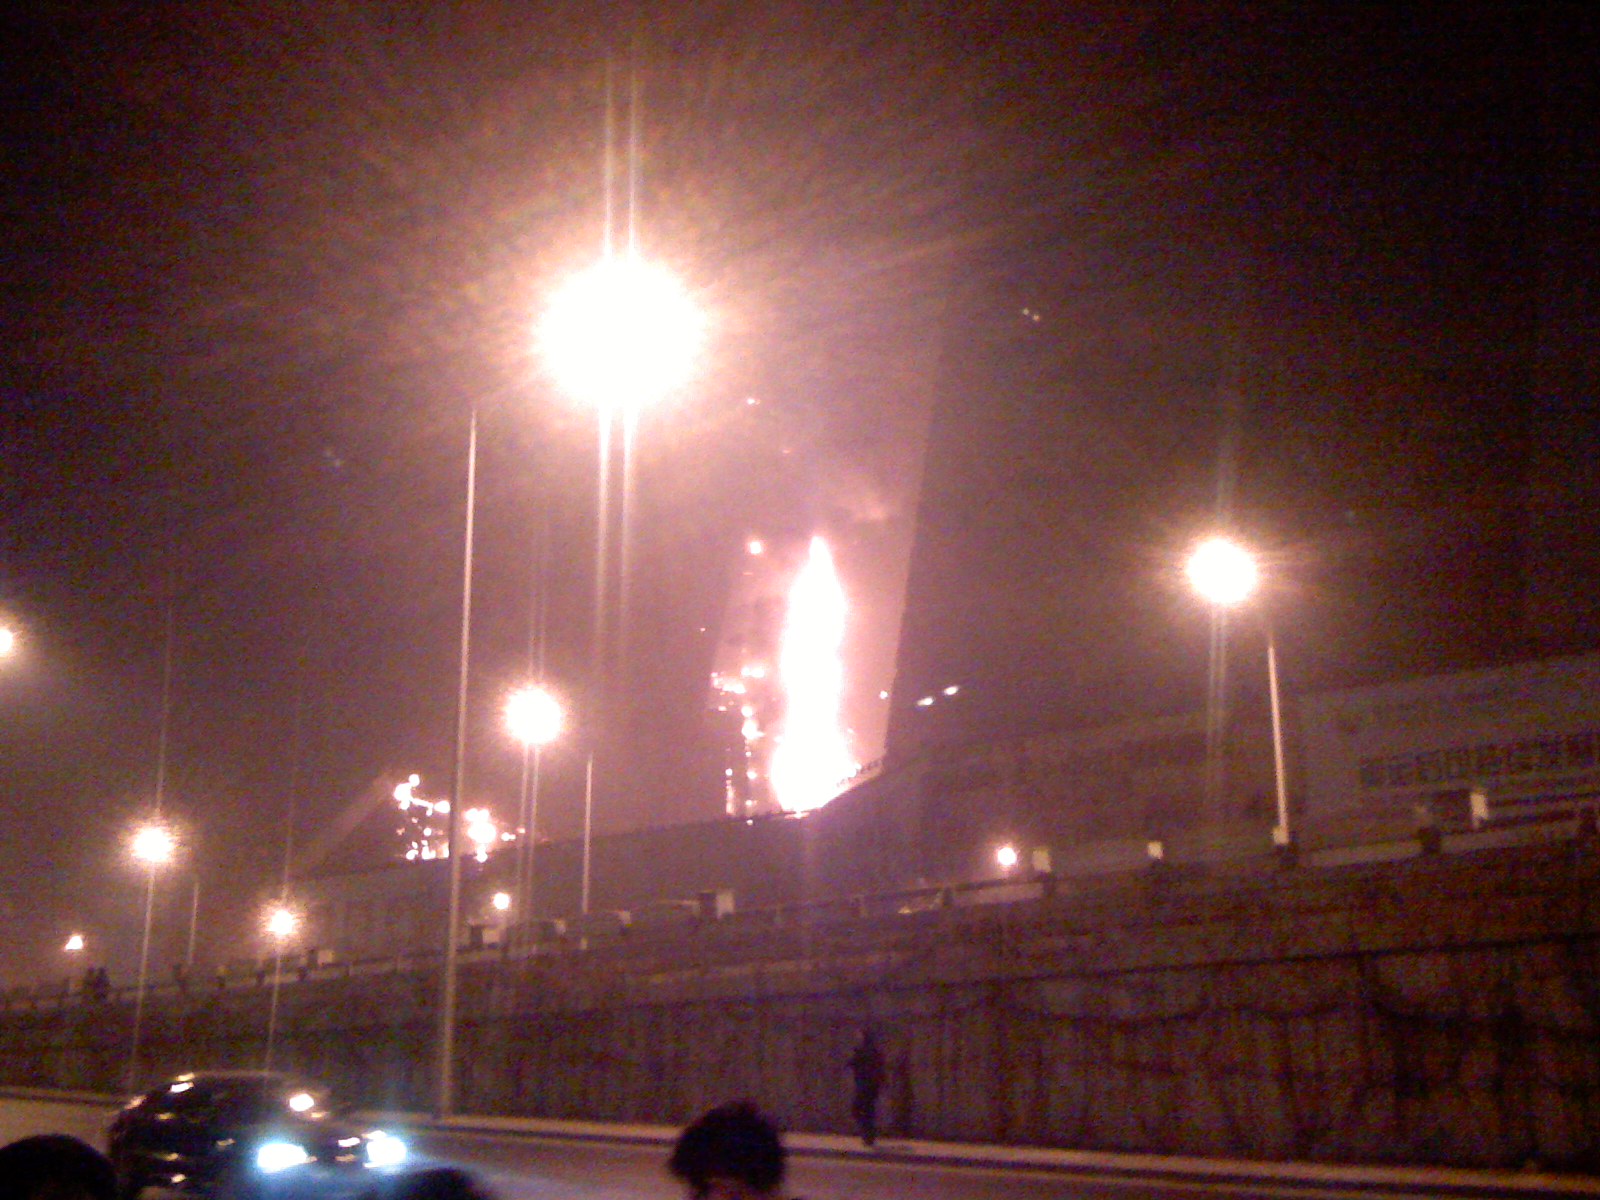 Seven Years Later: New Photos of the Spring Festival CCTV Hotel Fire